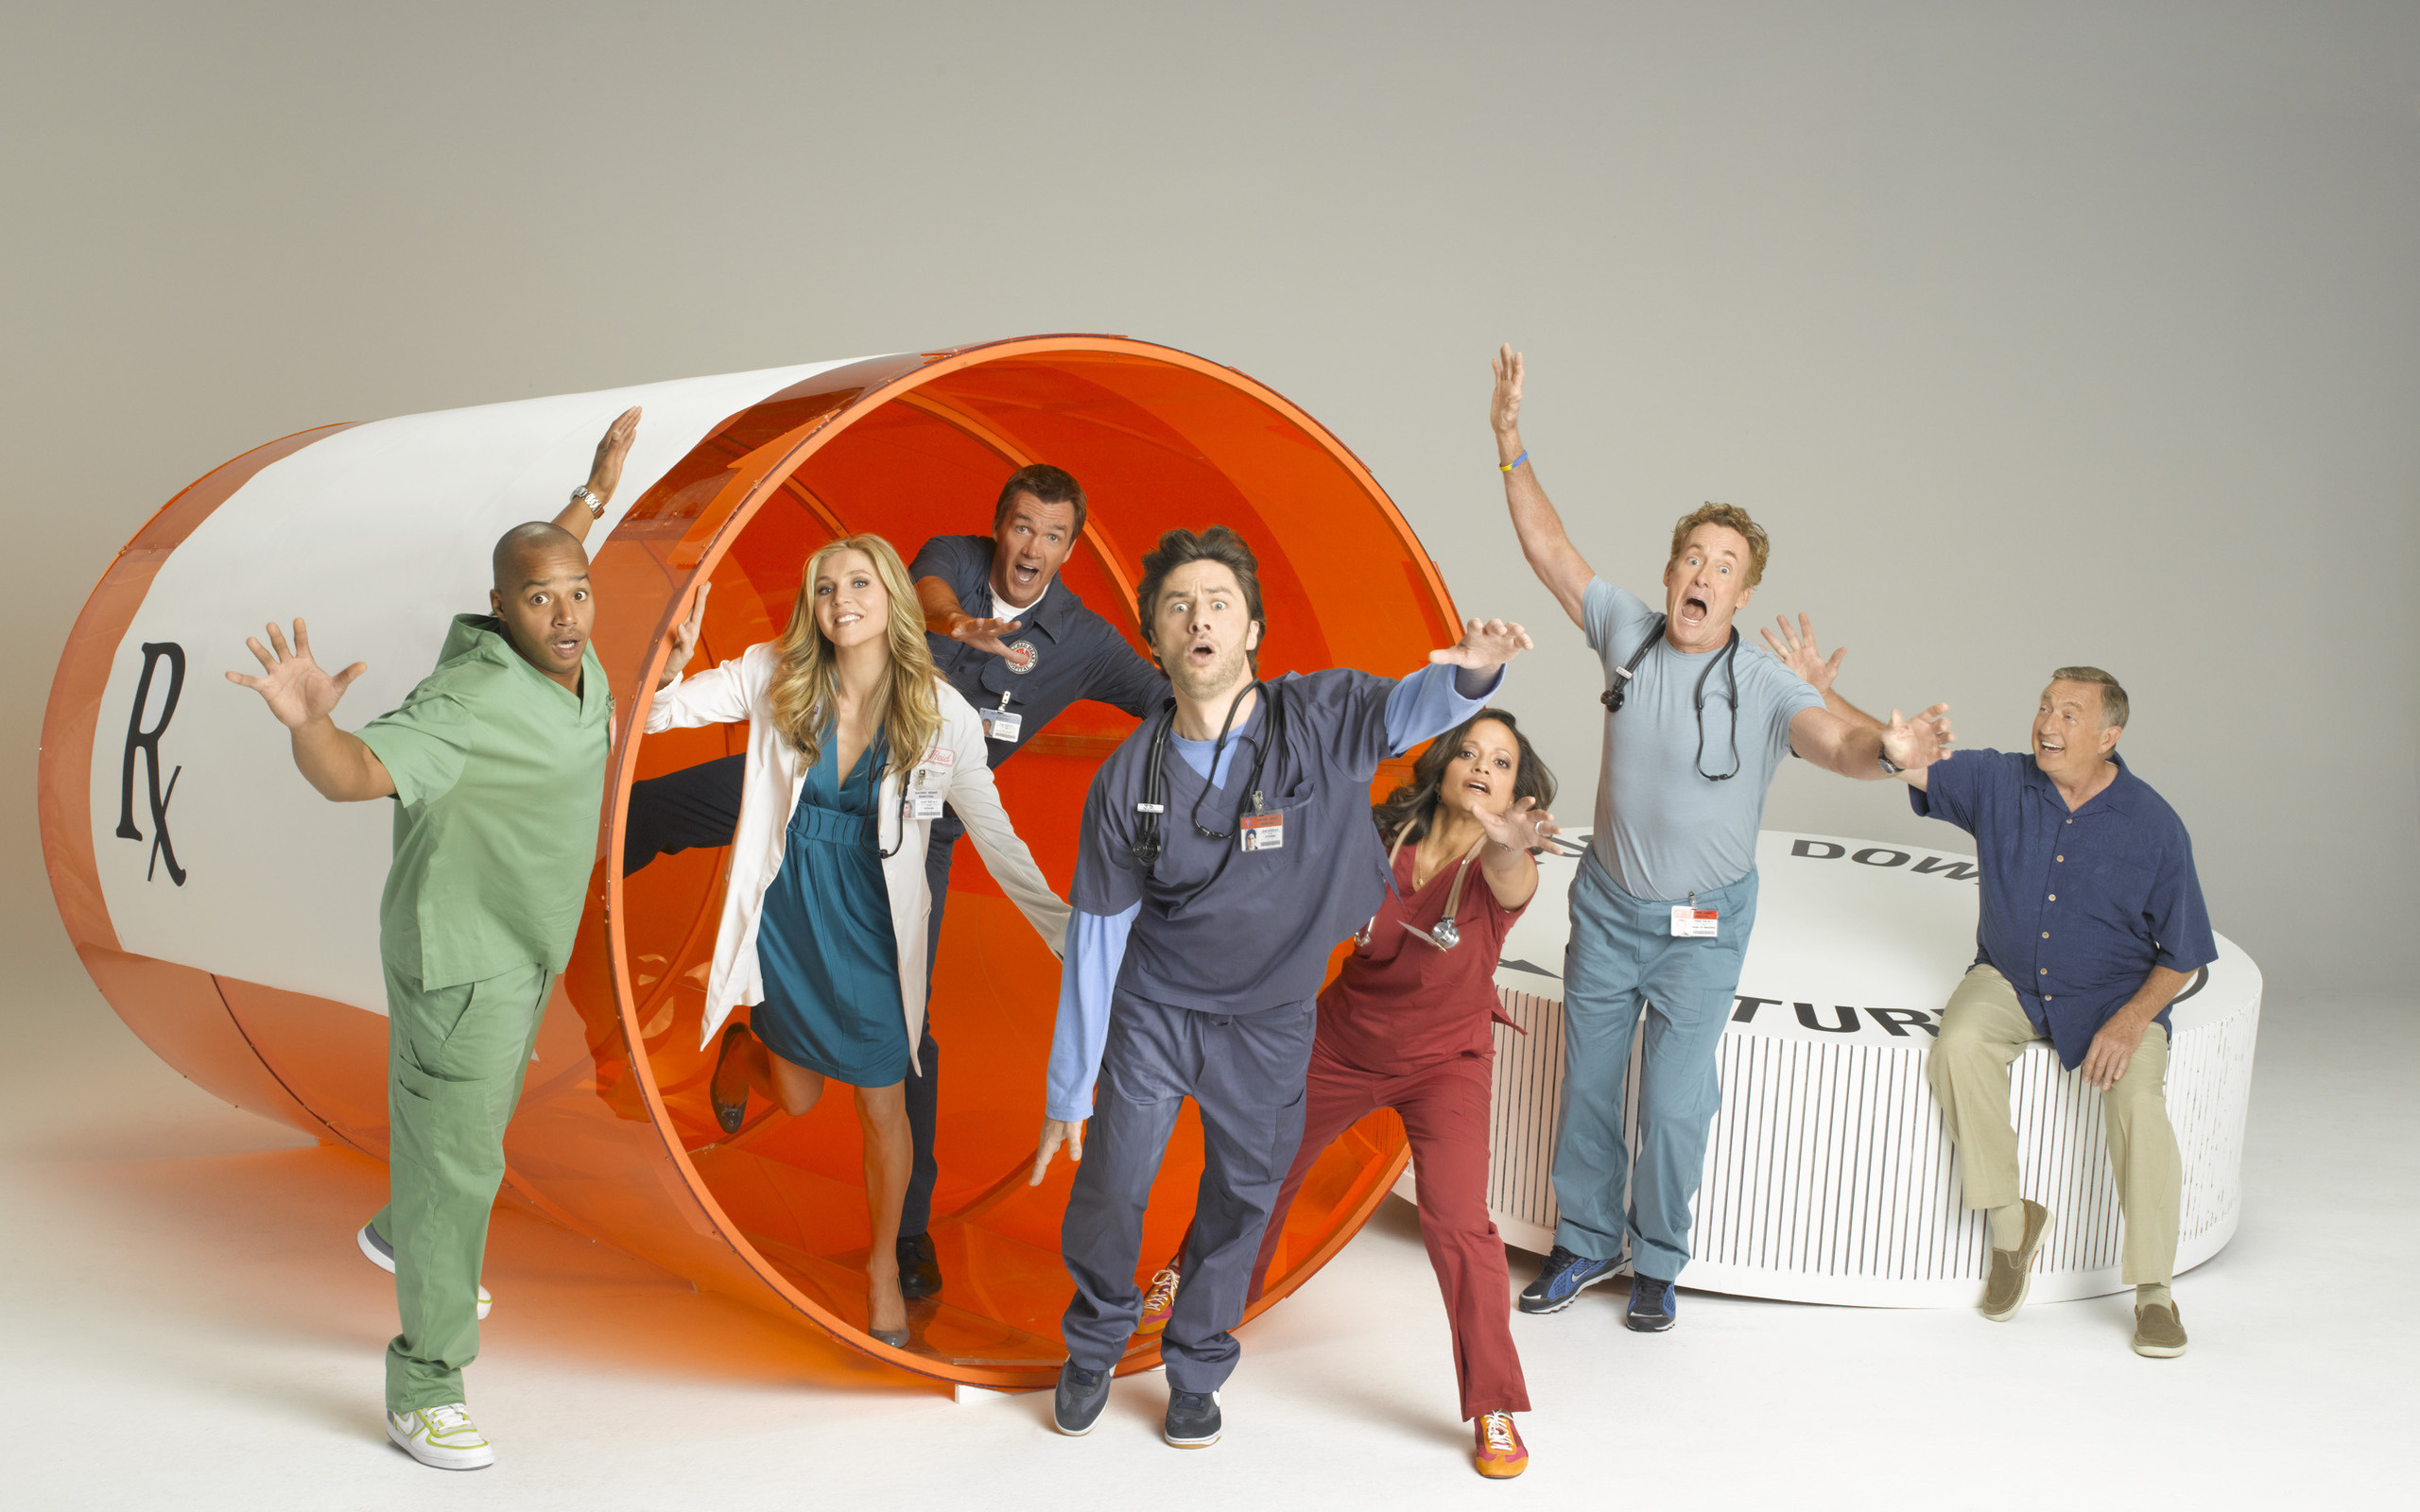 Scrubs (TV Series): An American comedy-drama show, nominated for 17 Primetime Emmy Awards, with two wins. 2560x1600 HD Wallpaper.